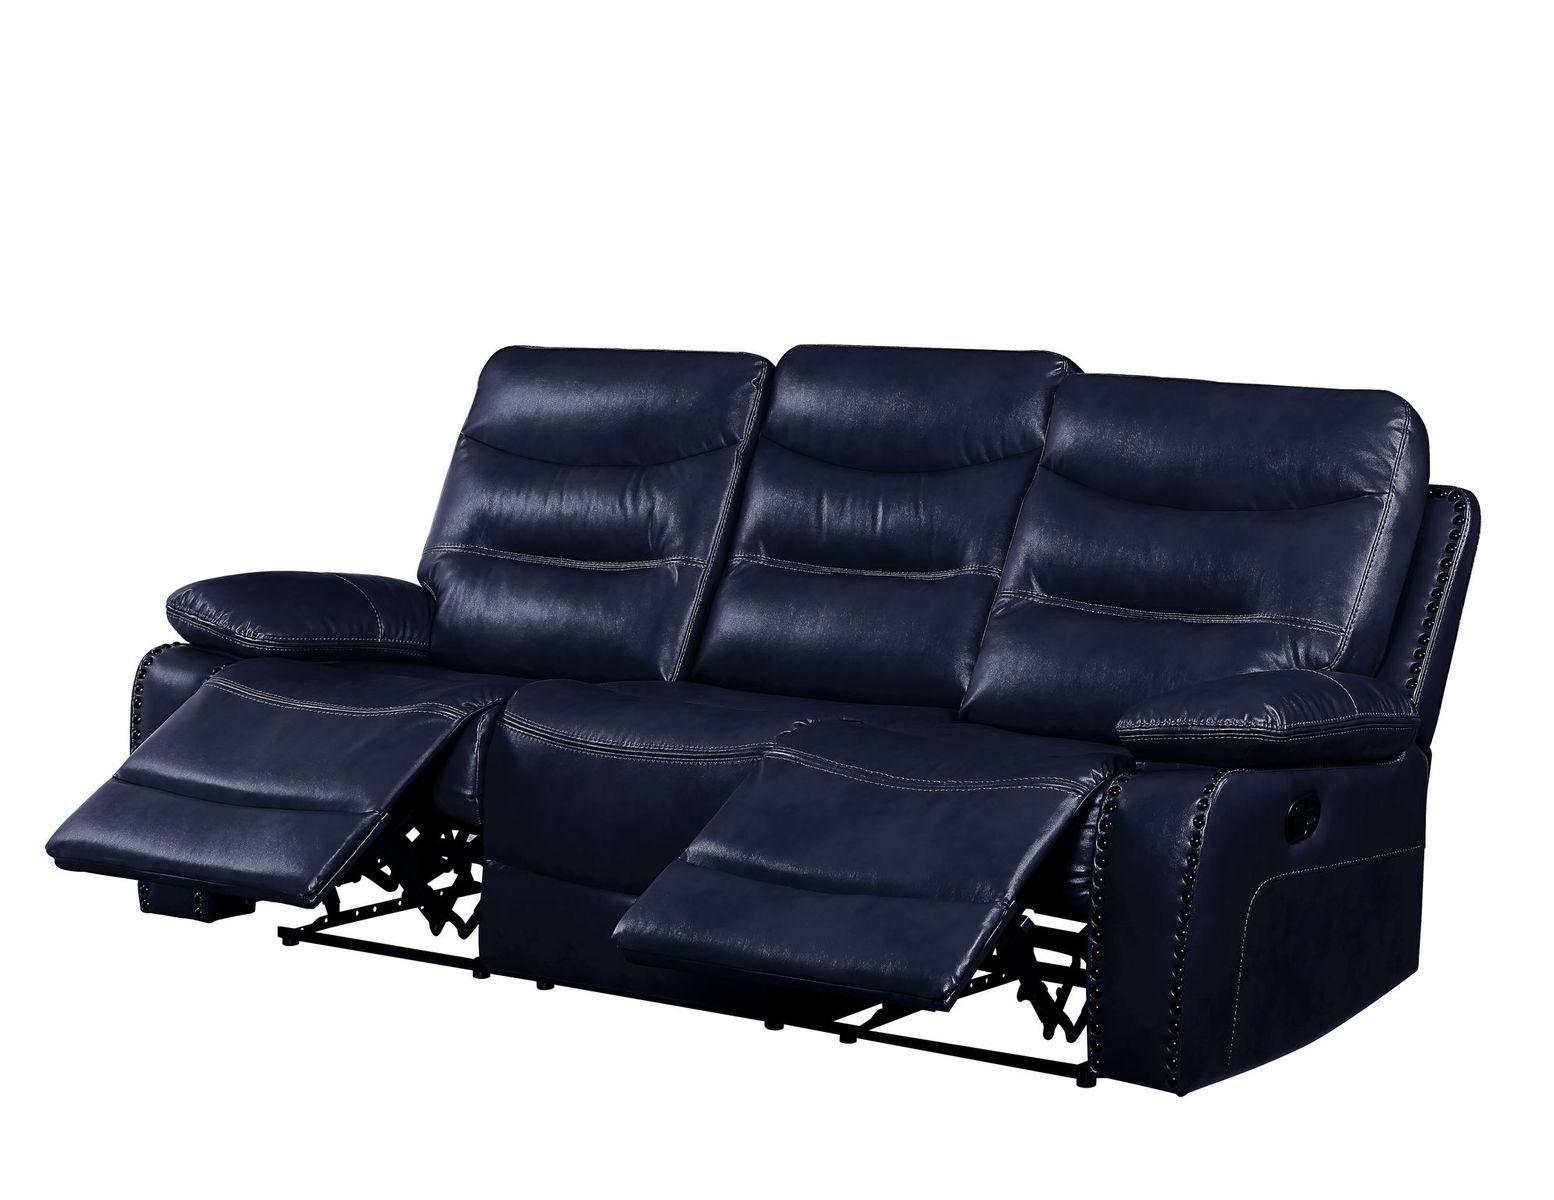 ACME Aashi Sofa (Motion), Navy Leather-Gel Match 55370 - Enova Luxe Home Store